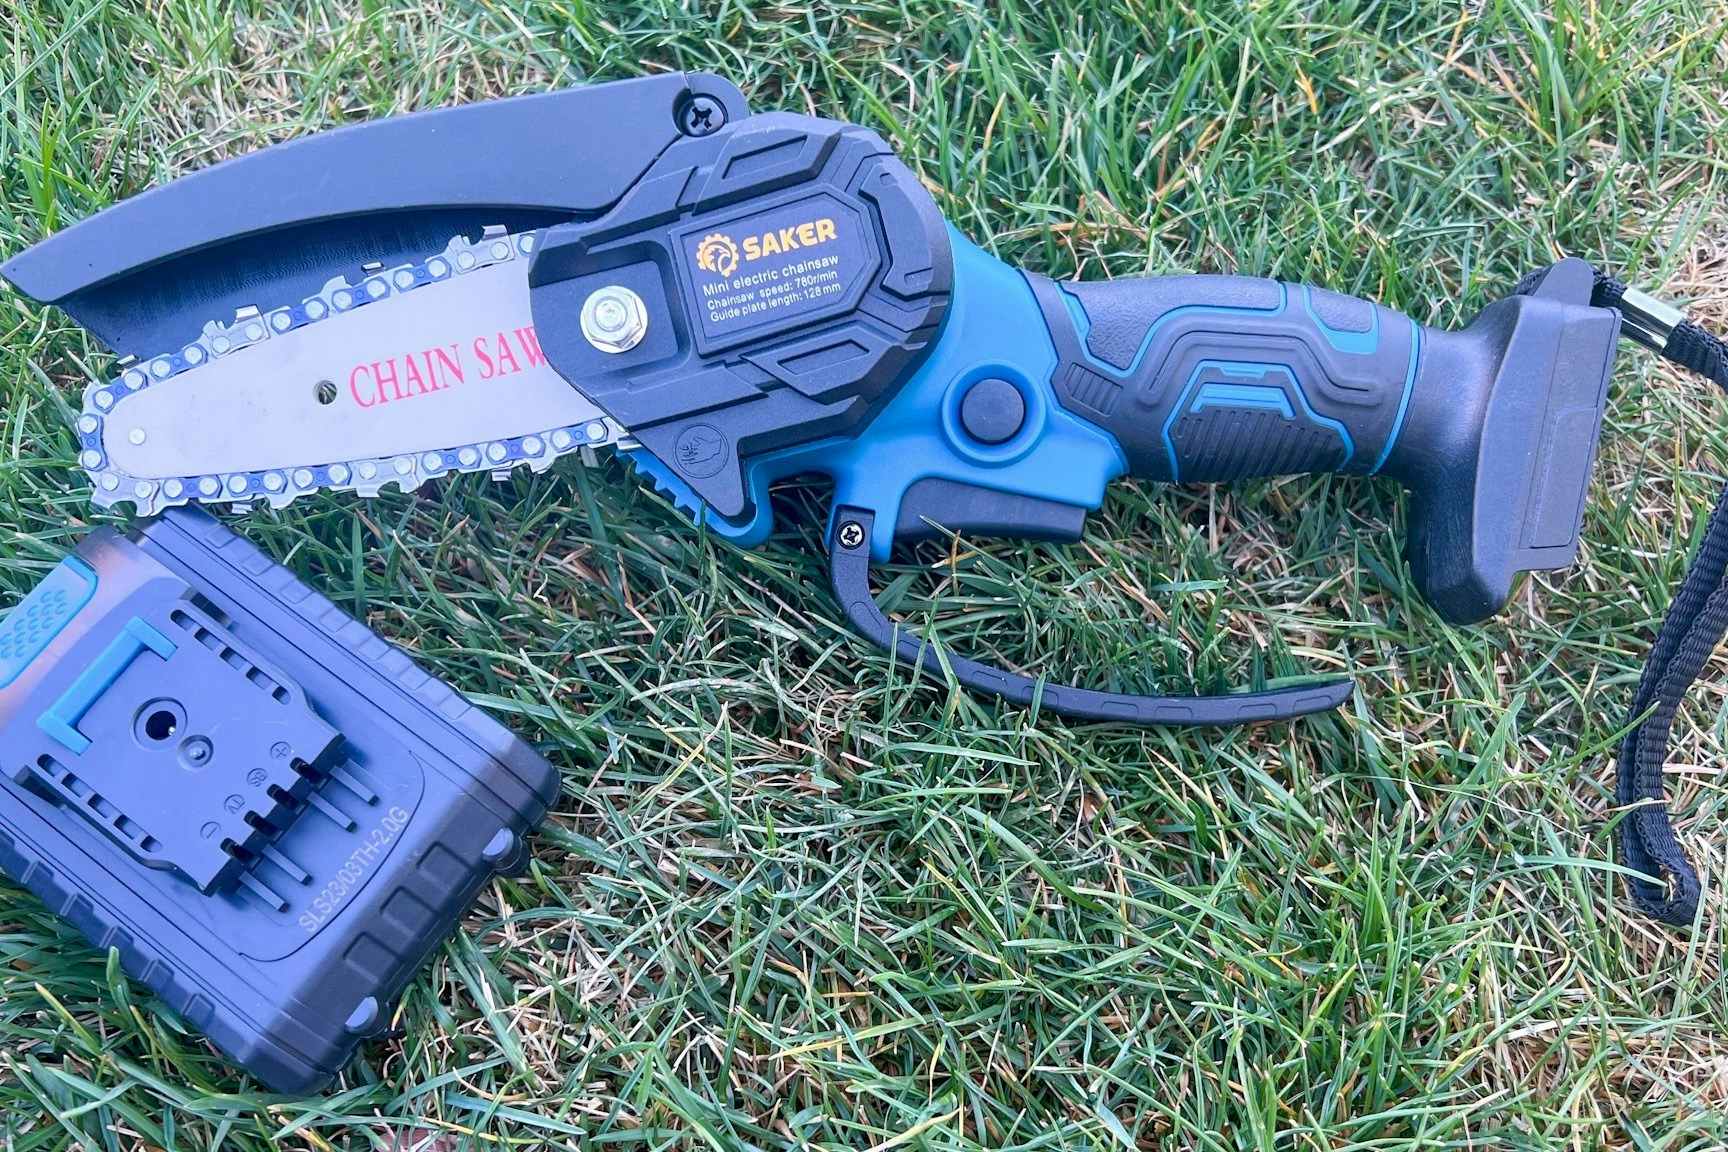 This Mini Electric Chainsaw Dropped to $39.99 on Amazon